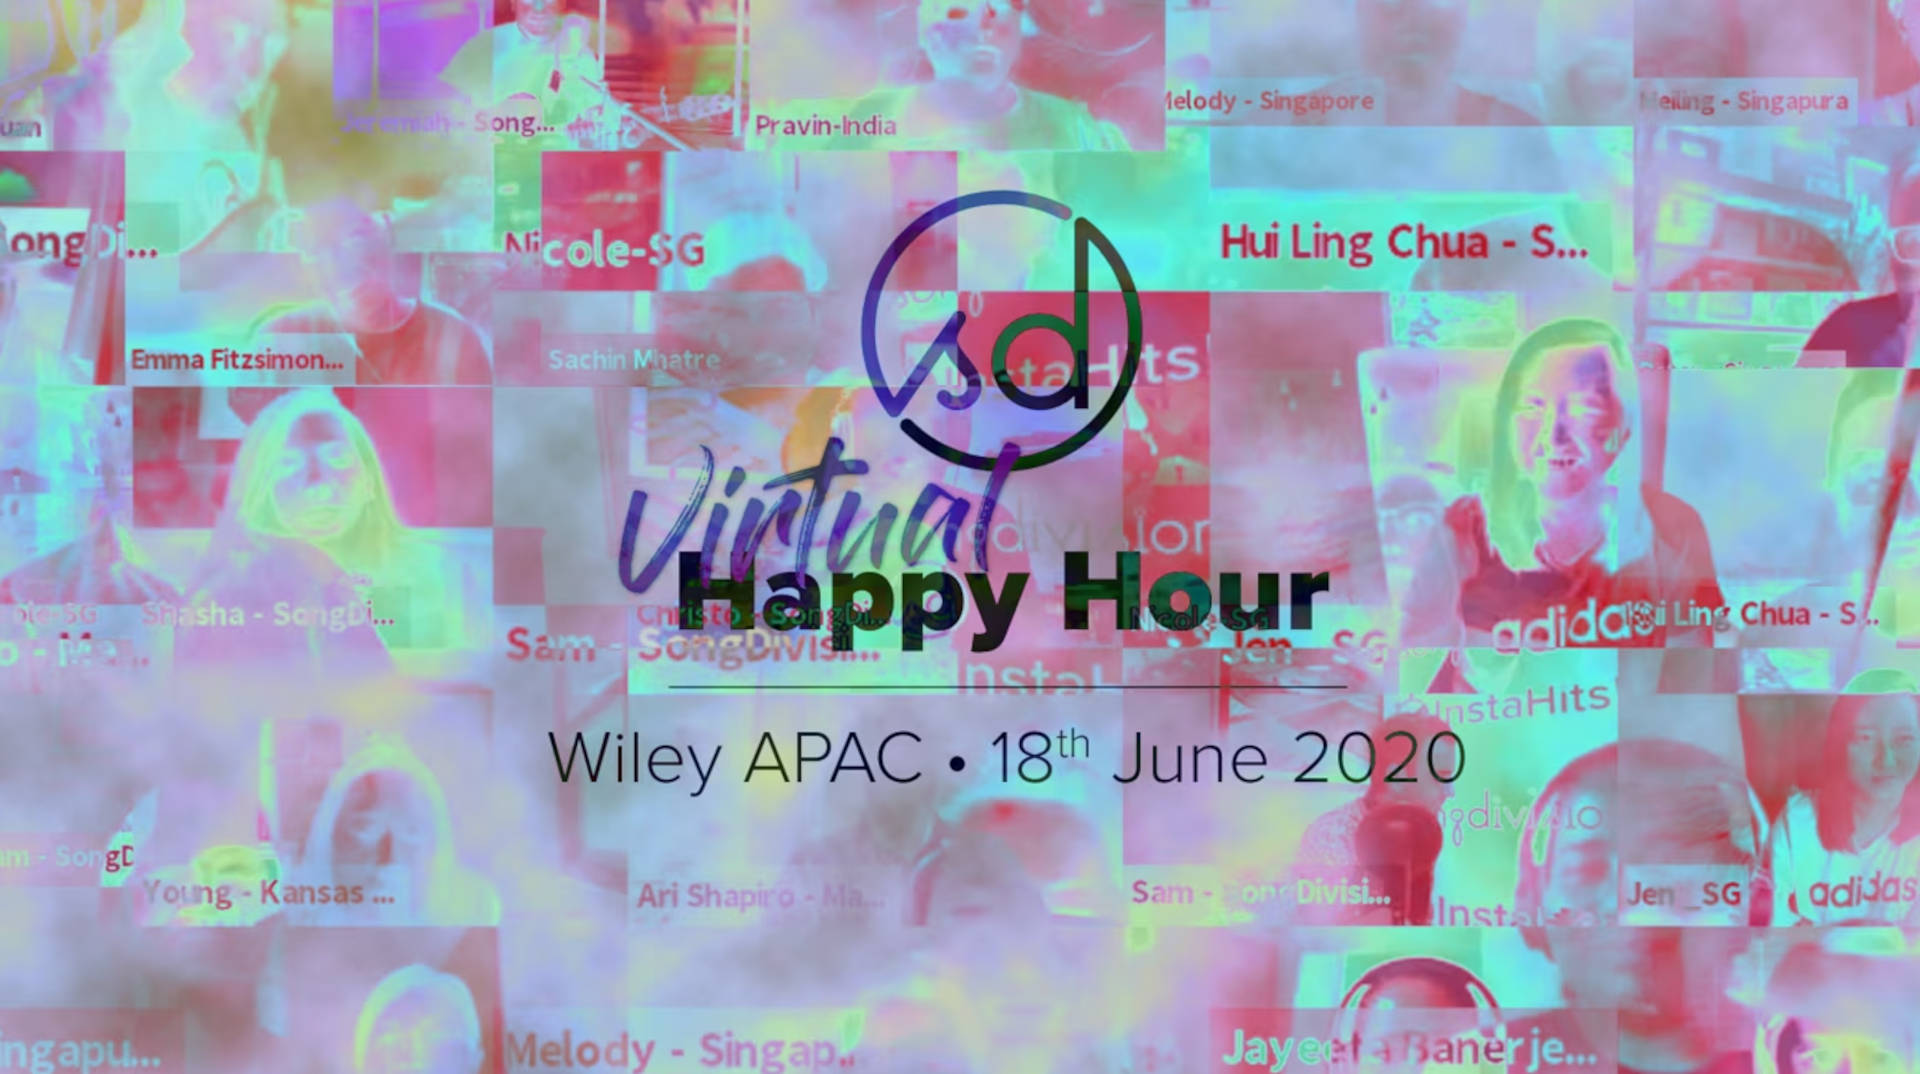 Wiley APAC: Virtual Happy Hour with SongDivision